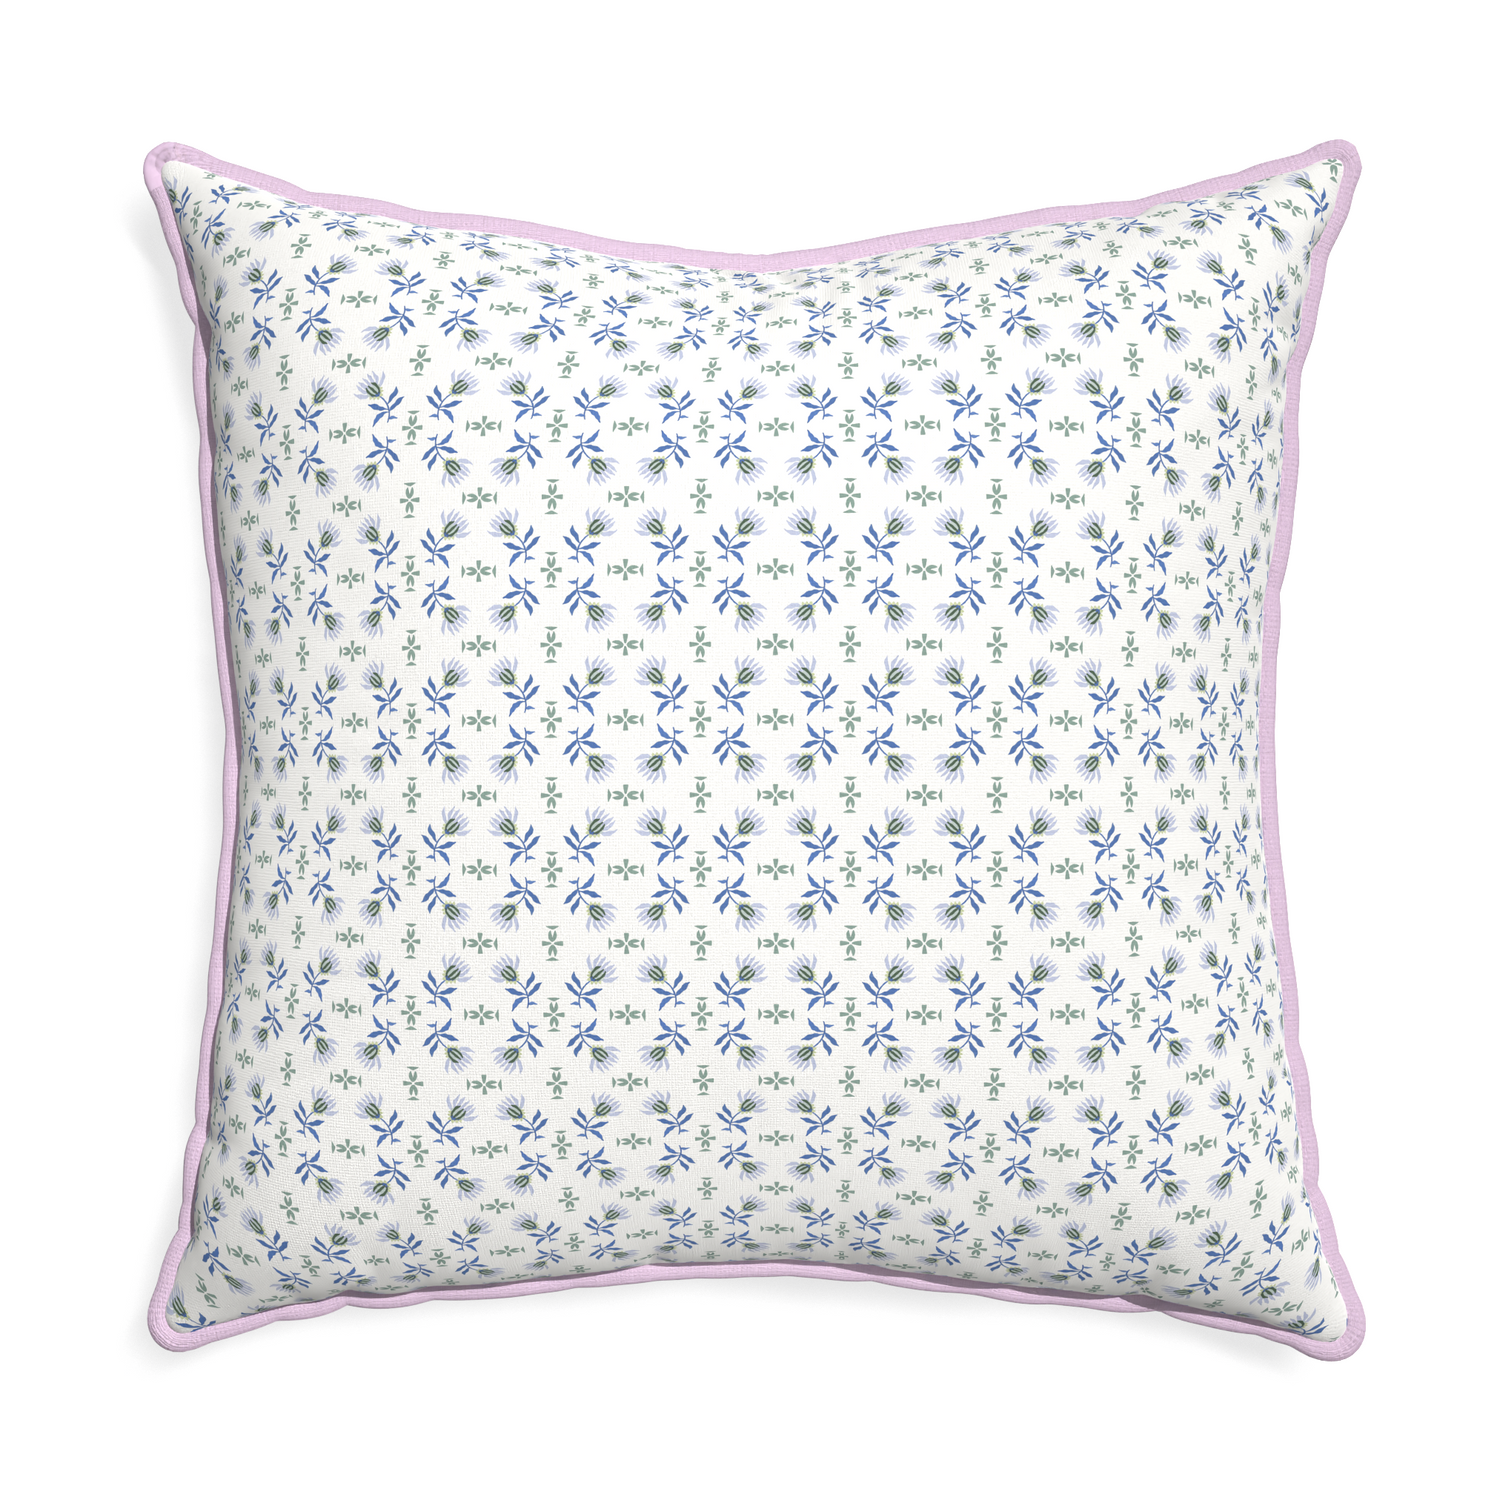 Euro-sham lee custom blue & green floralpillow with l piping on white background